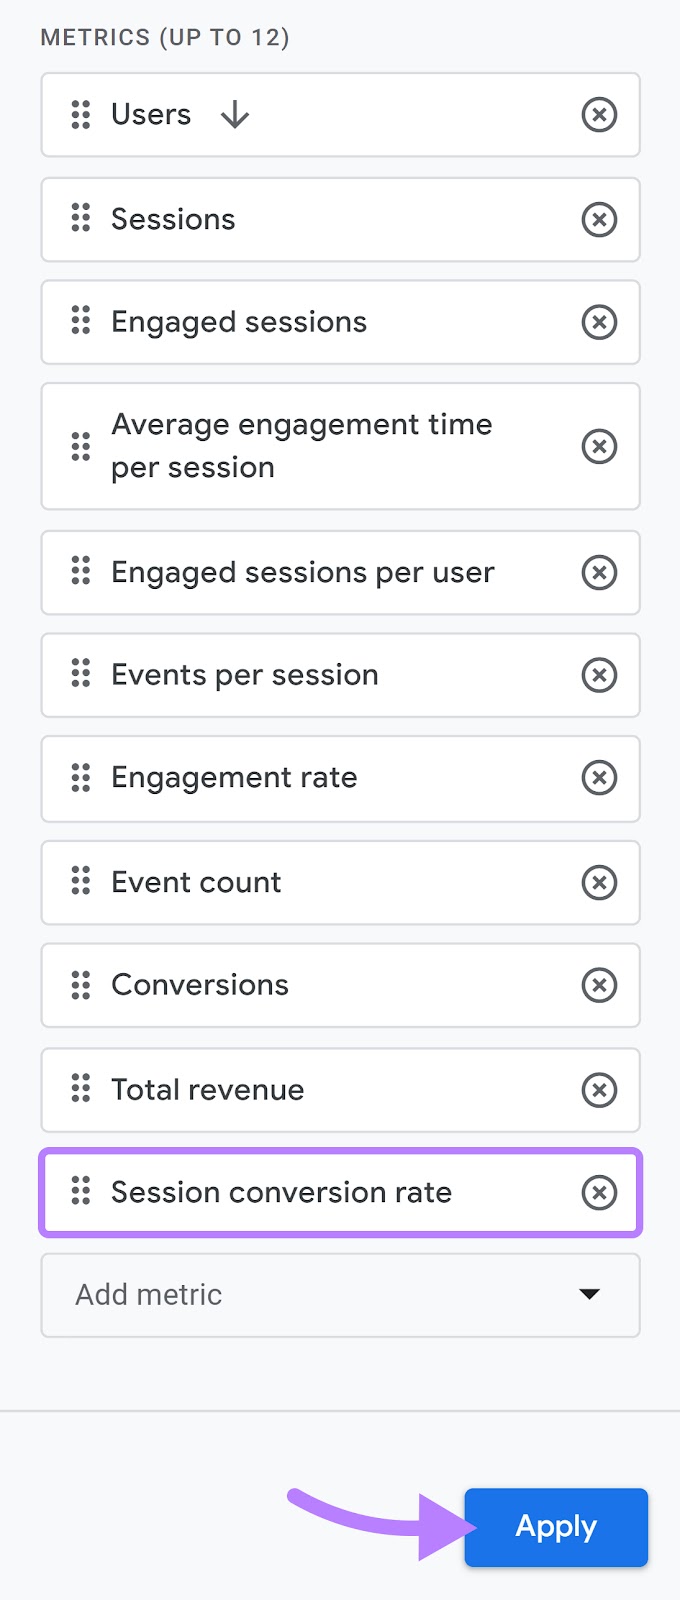 “Session conversion rate” enactment    selected from the metrics list